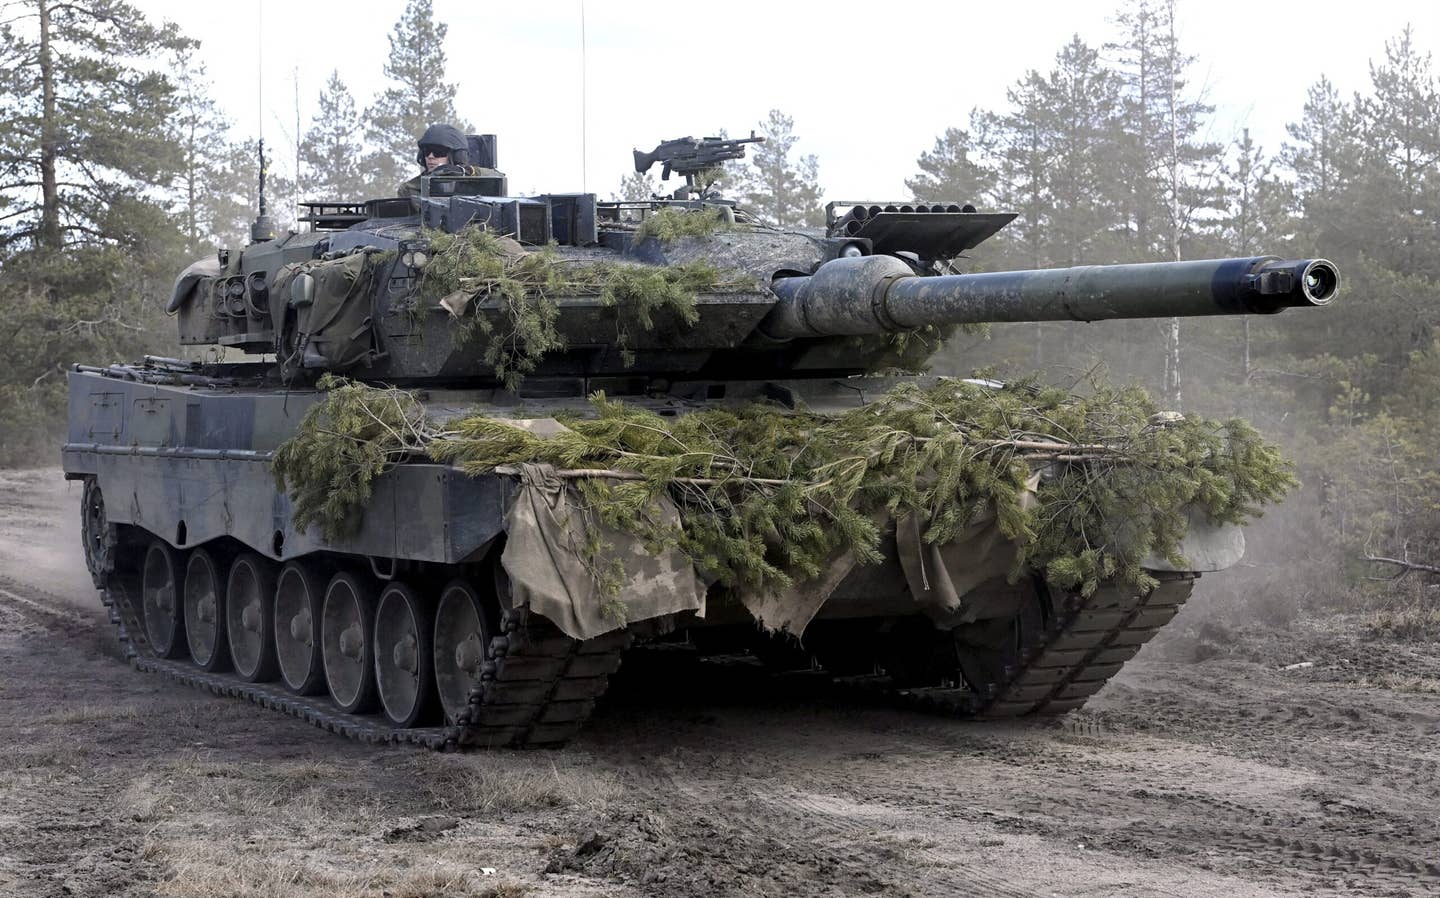 A Leopard 2 tank of the Finnish Army during the Arrow 22 exercise at the Niinisalo garrison in Kankaanpää, western Finland, earlier this month. <em>Photo by HEIKKI SAUKKOMAA/Lehtikuva/AFP via Getty Images</em>